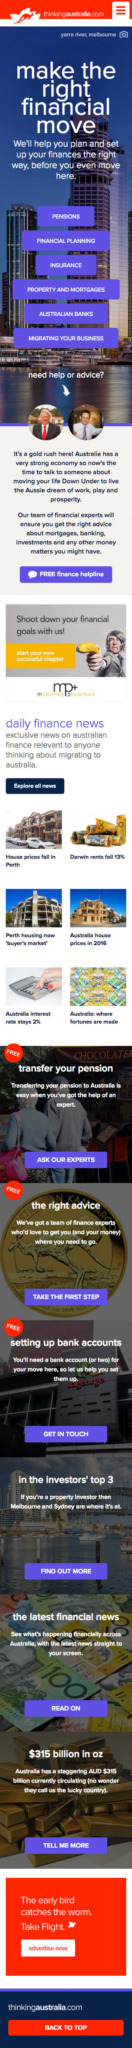 Thinking Australia - Finance- Site by Clever Starfish